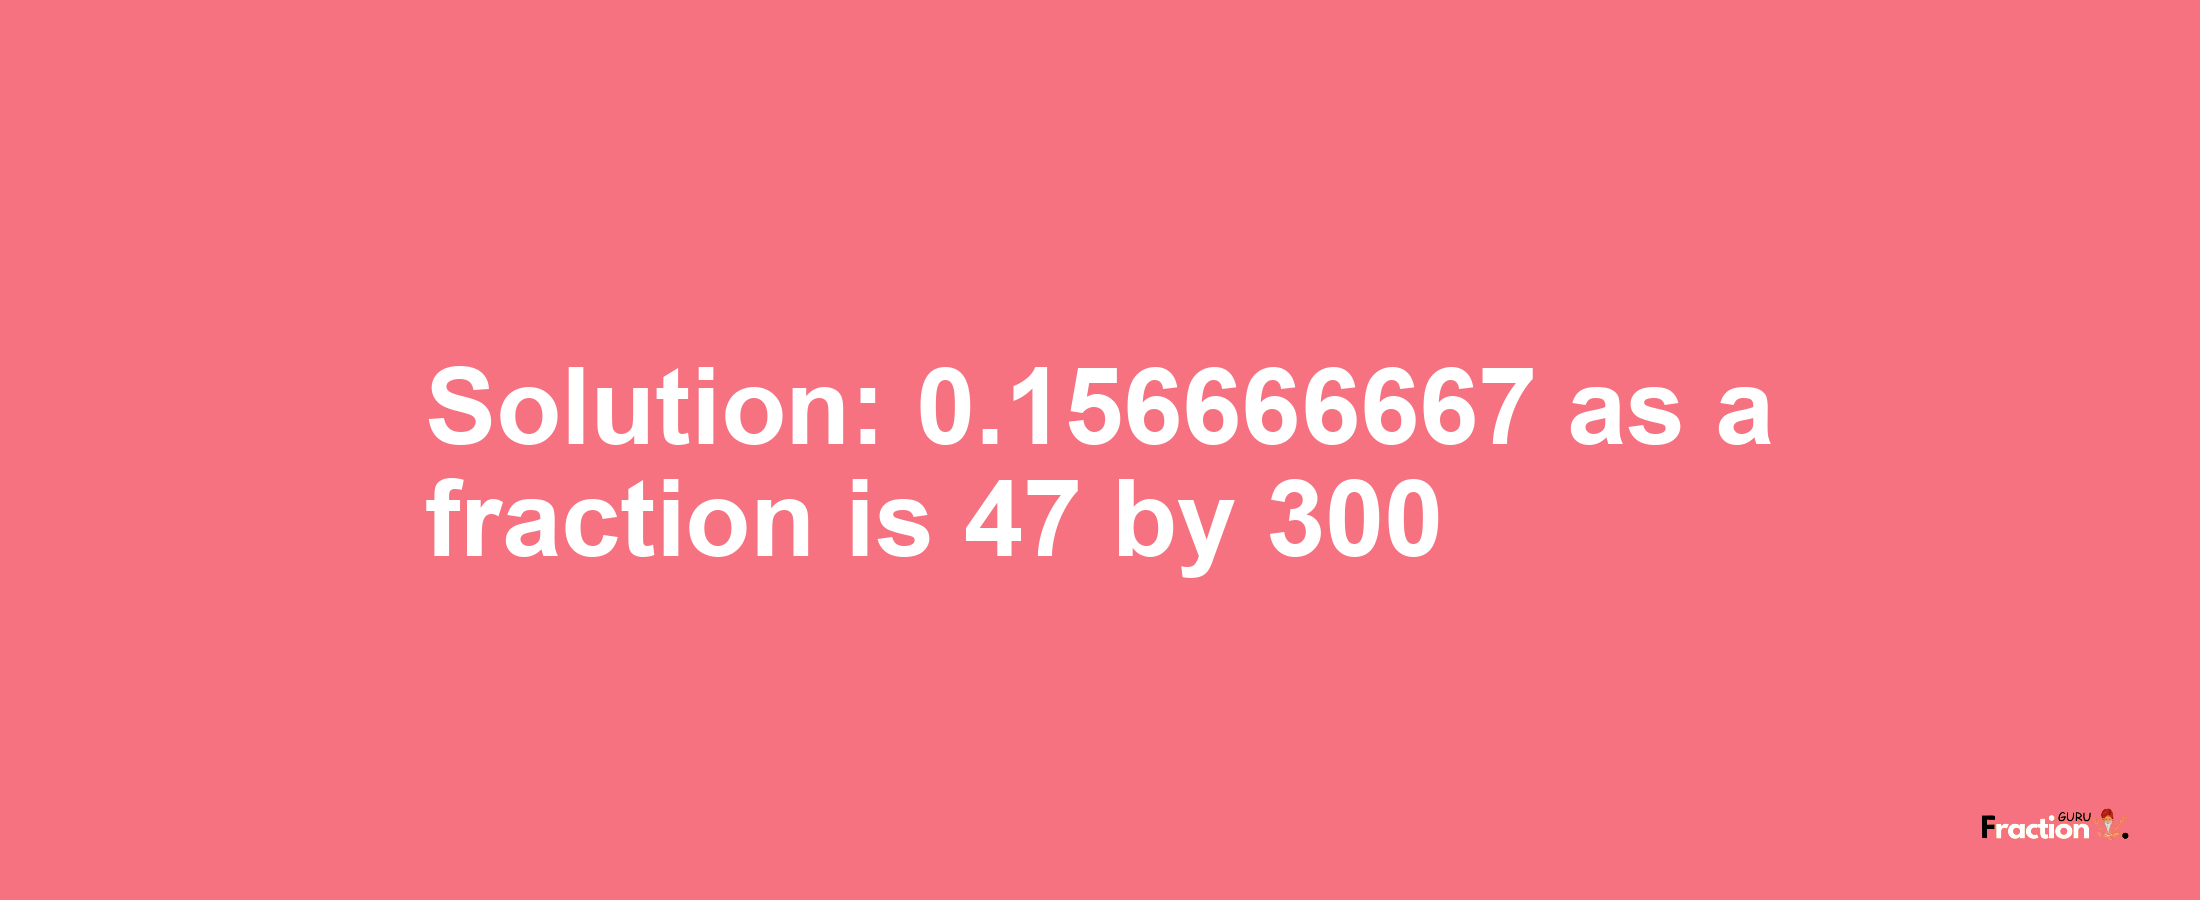 Solution:0.156666667 as a fraction is 47/300